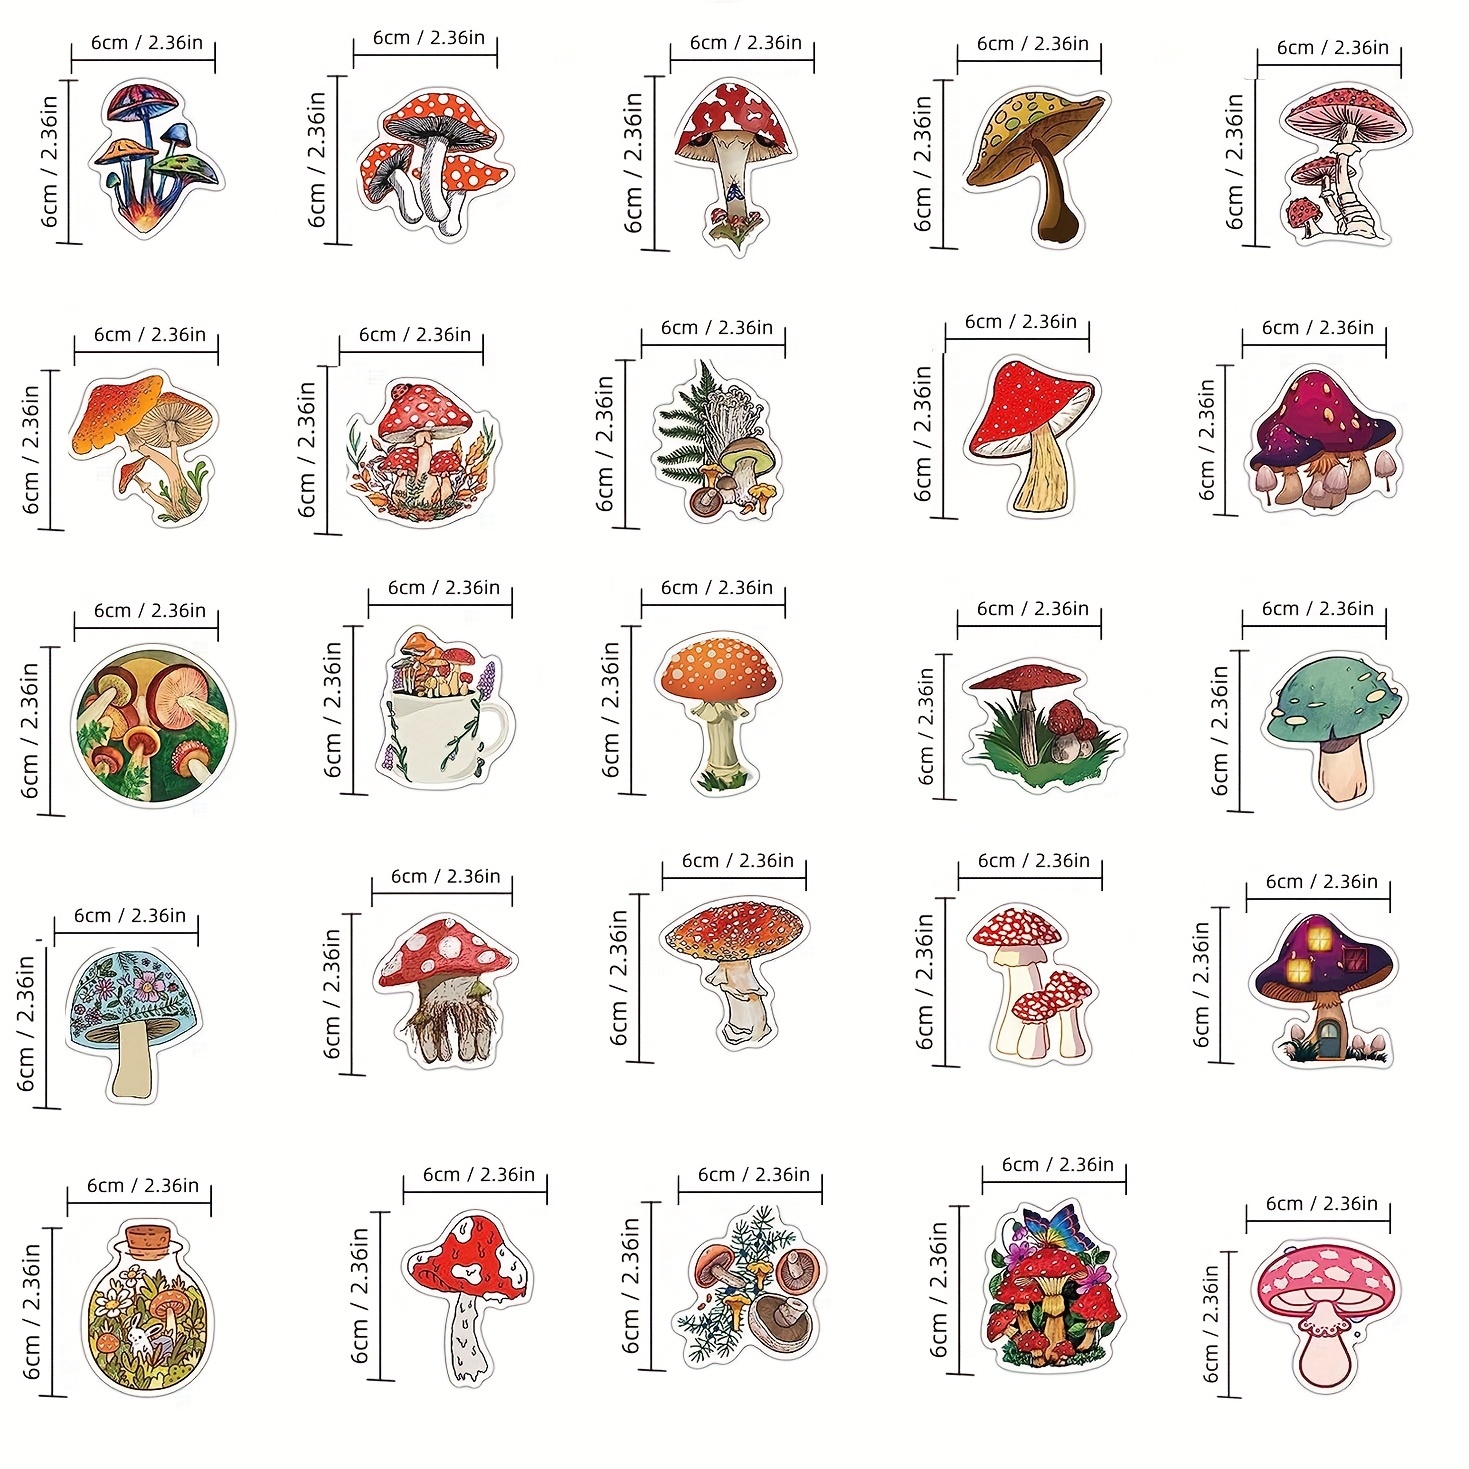 60PCS Cute Cartoon Mushroom Stickers Cottagecore Stickers Mushrooms Decor  Vinyl Waterproof Stickers for Water  Bottle,Computer,Laptop,Phone,Luggage,Notebook